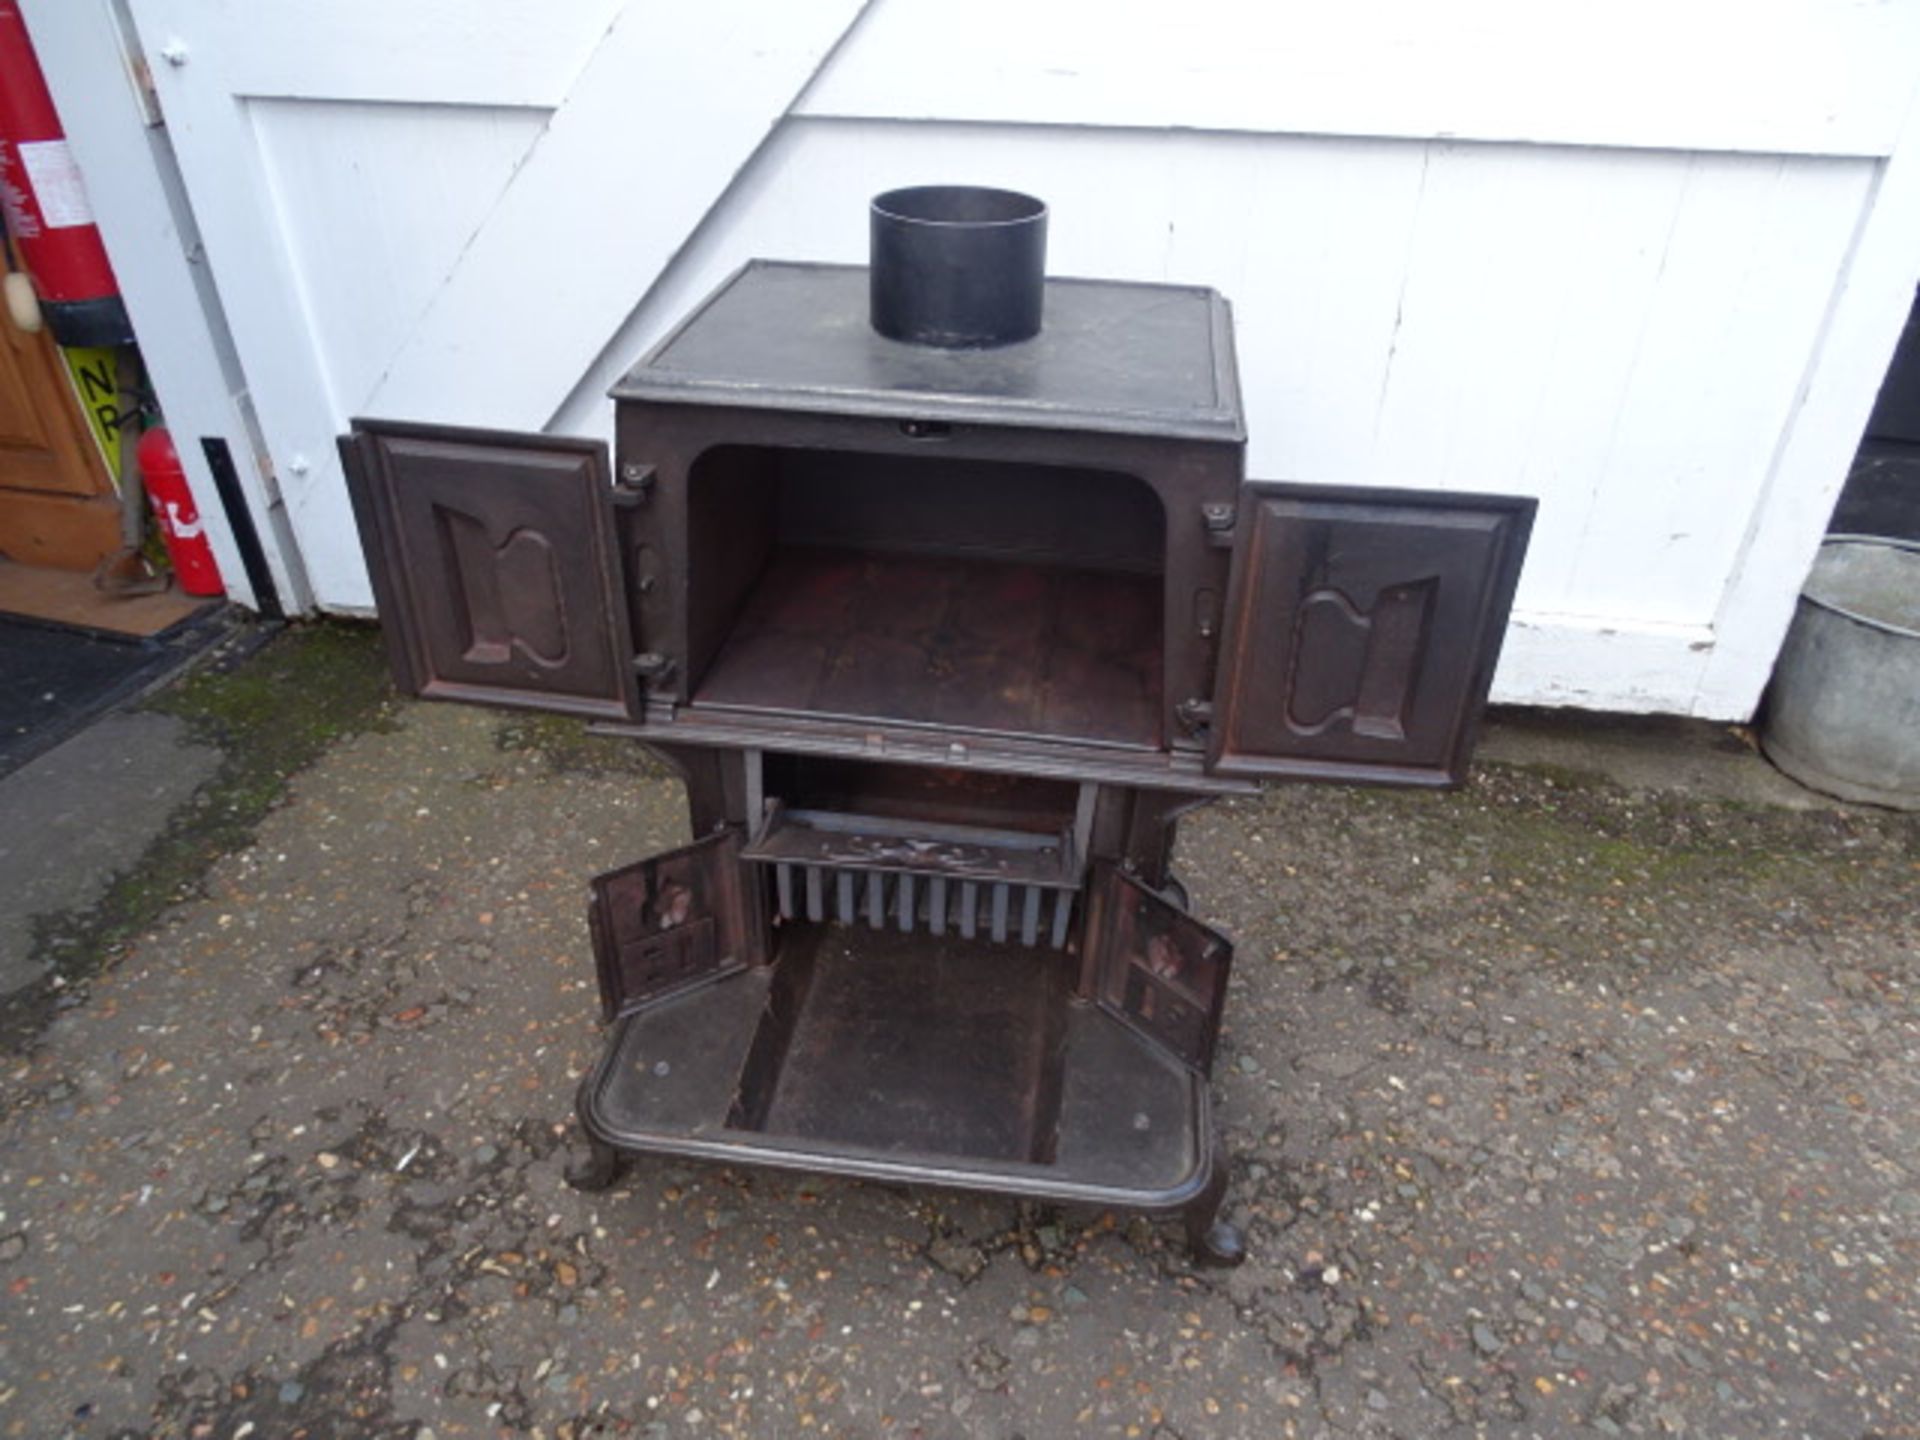 The Wee Ben tailors cast iron laundry stove with ornate door decorations incl two tailor goose irons - Image 10 of 10